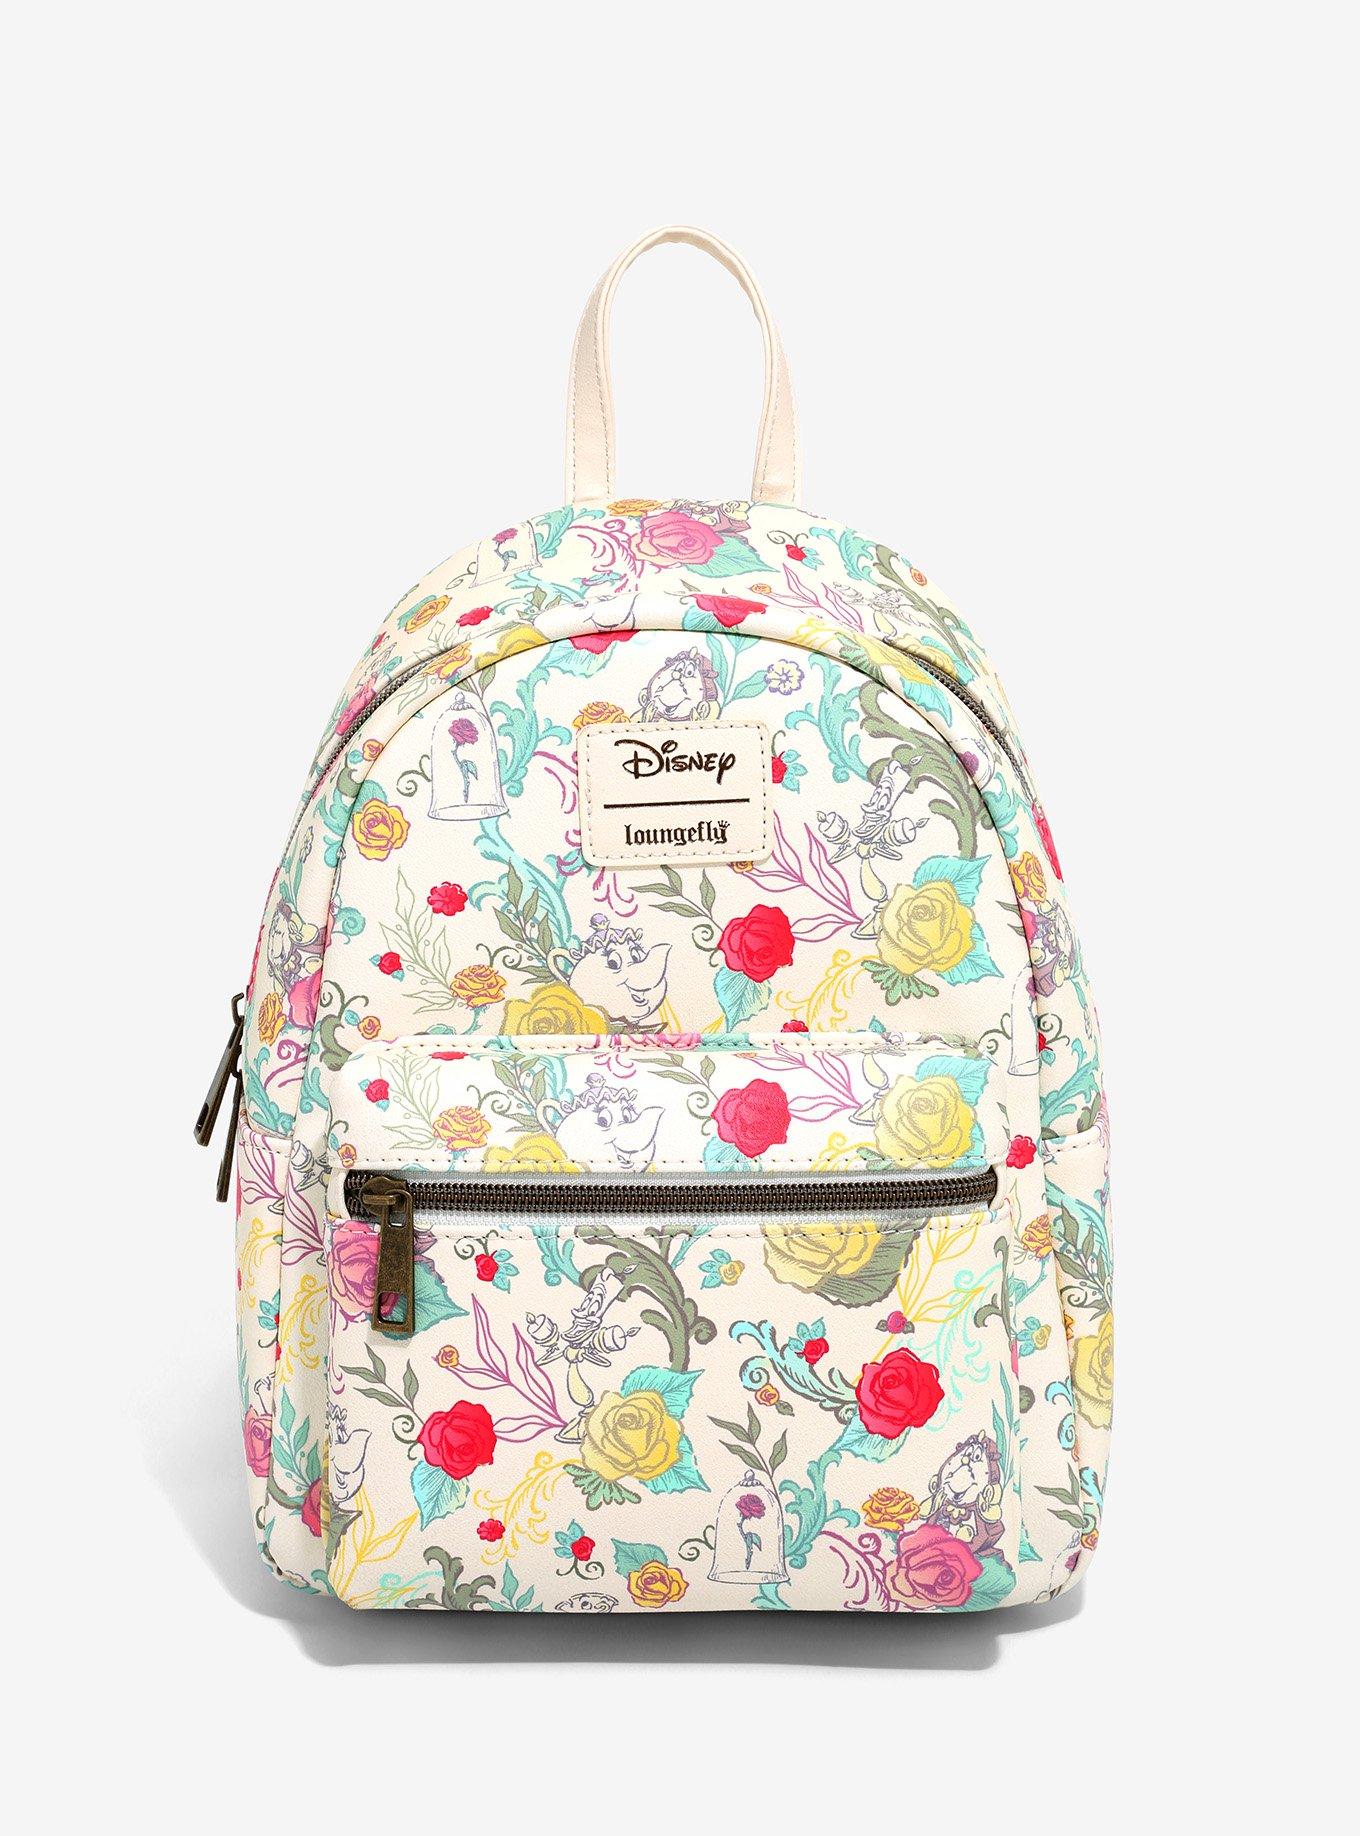 Disney Loungefly Bag - Beauty and the Beast - Belle Floral